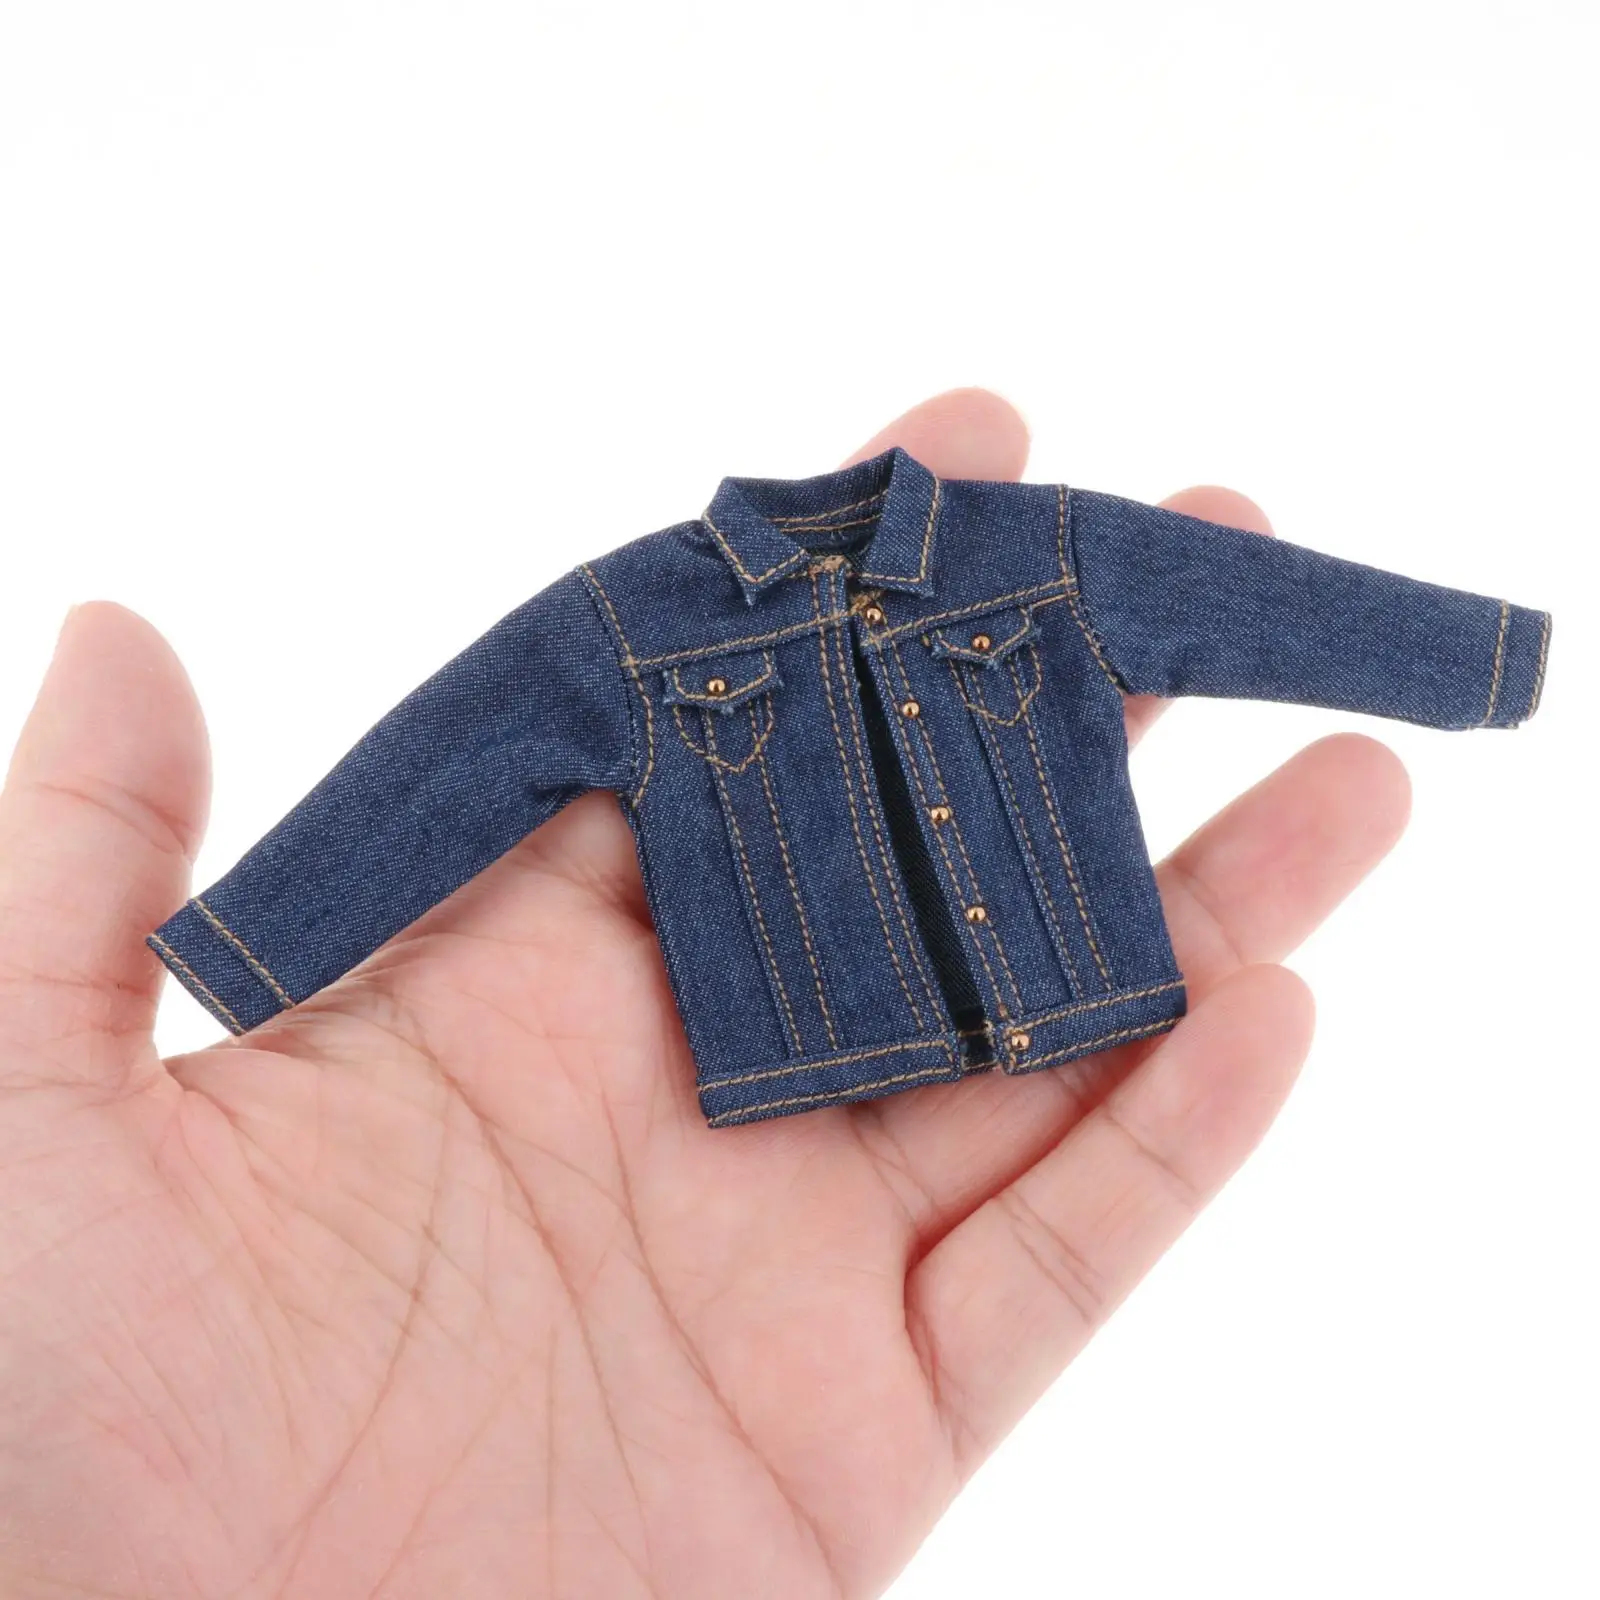 

1/12 Men Denim Jacket Costume Miniature Clothing Handmade Doll Clothes for 6 inch Male Soldiers Figures Doll Model Dress up Accs